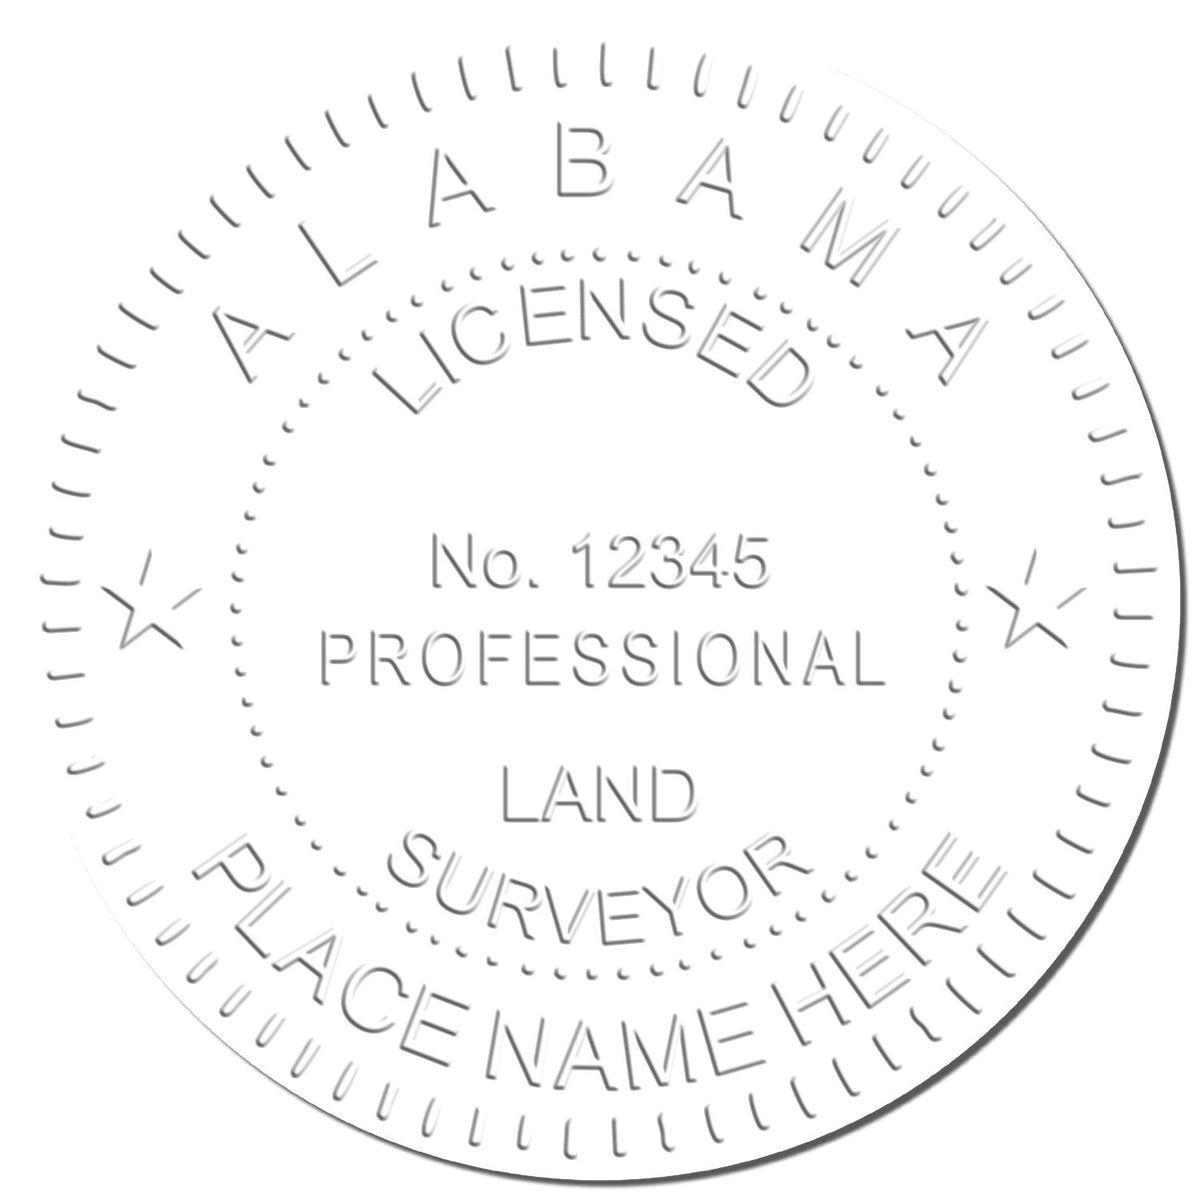 This paper is stamped with a sample imprint of the Gift Alabama Land Surveyor Seal, signifying its quality and reliability.